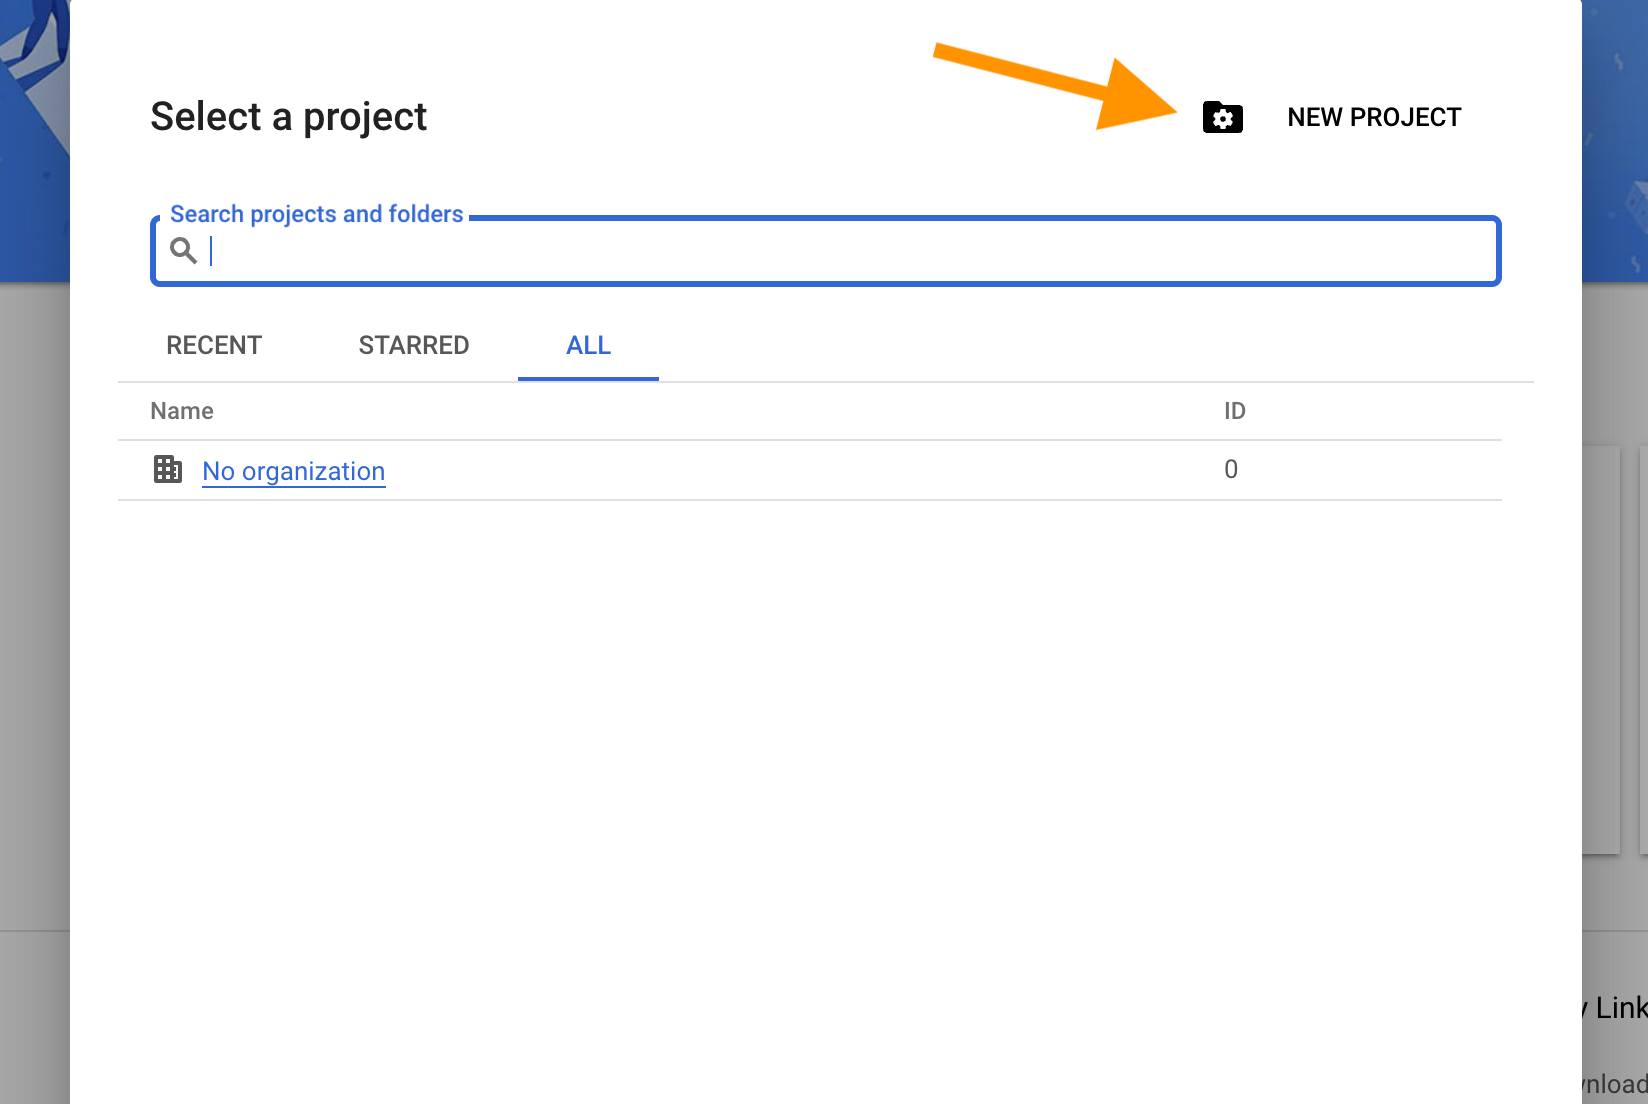 The "Select a project" with an arrow pointing to the "NEW PROJECT" button.